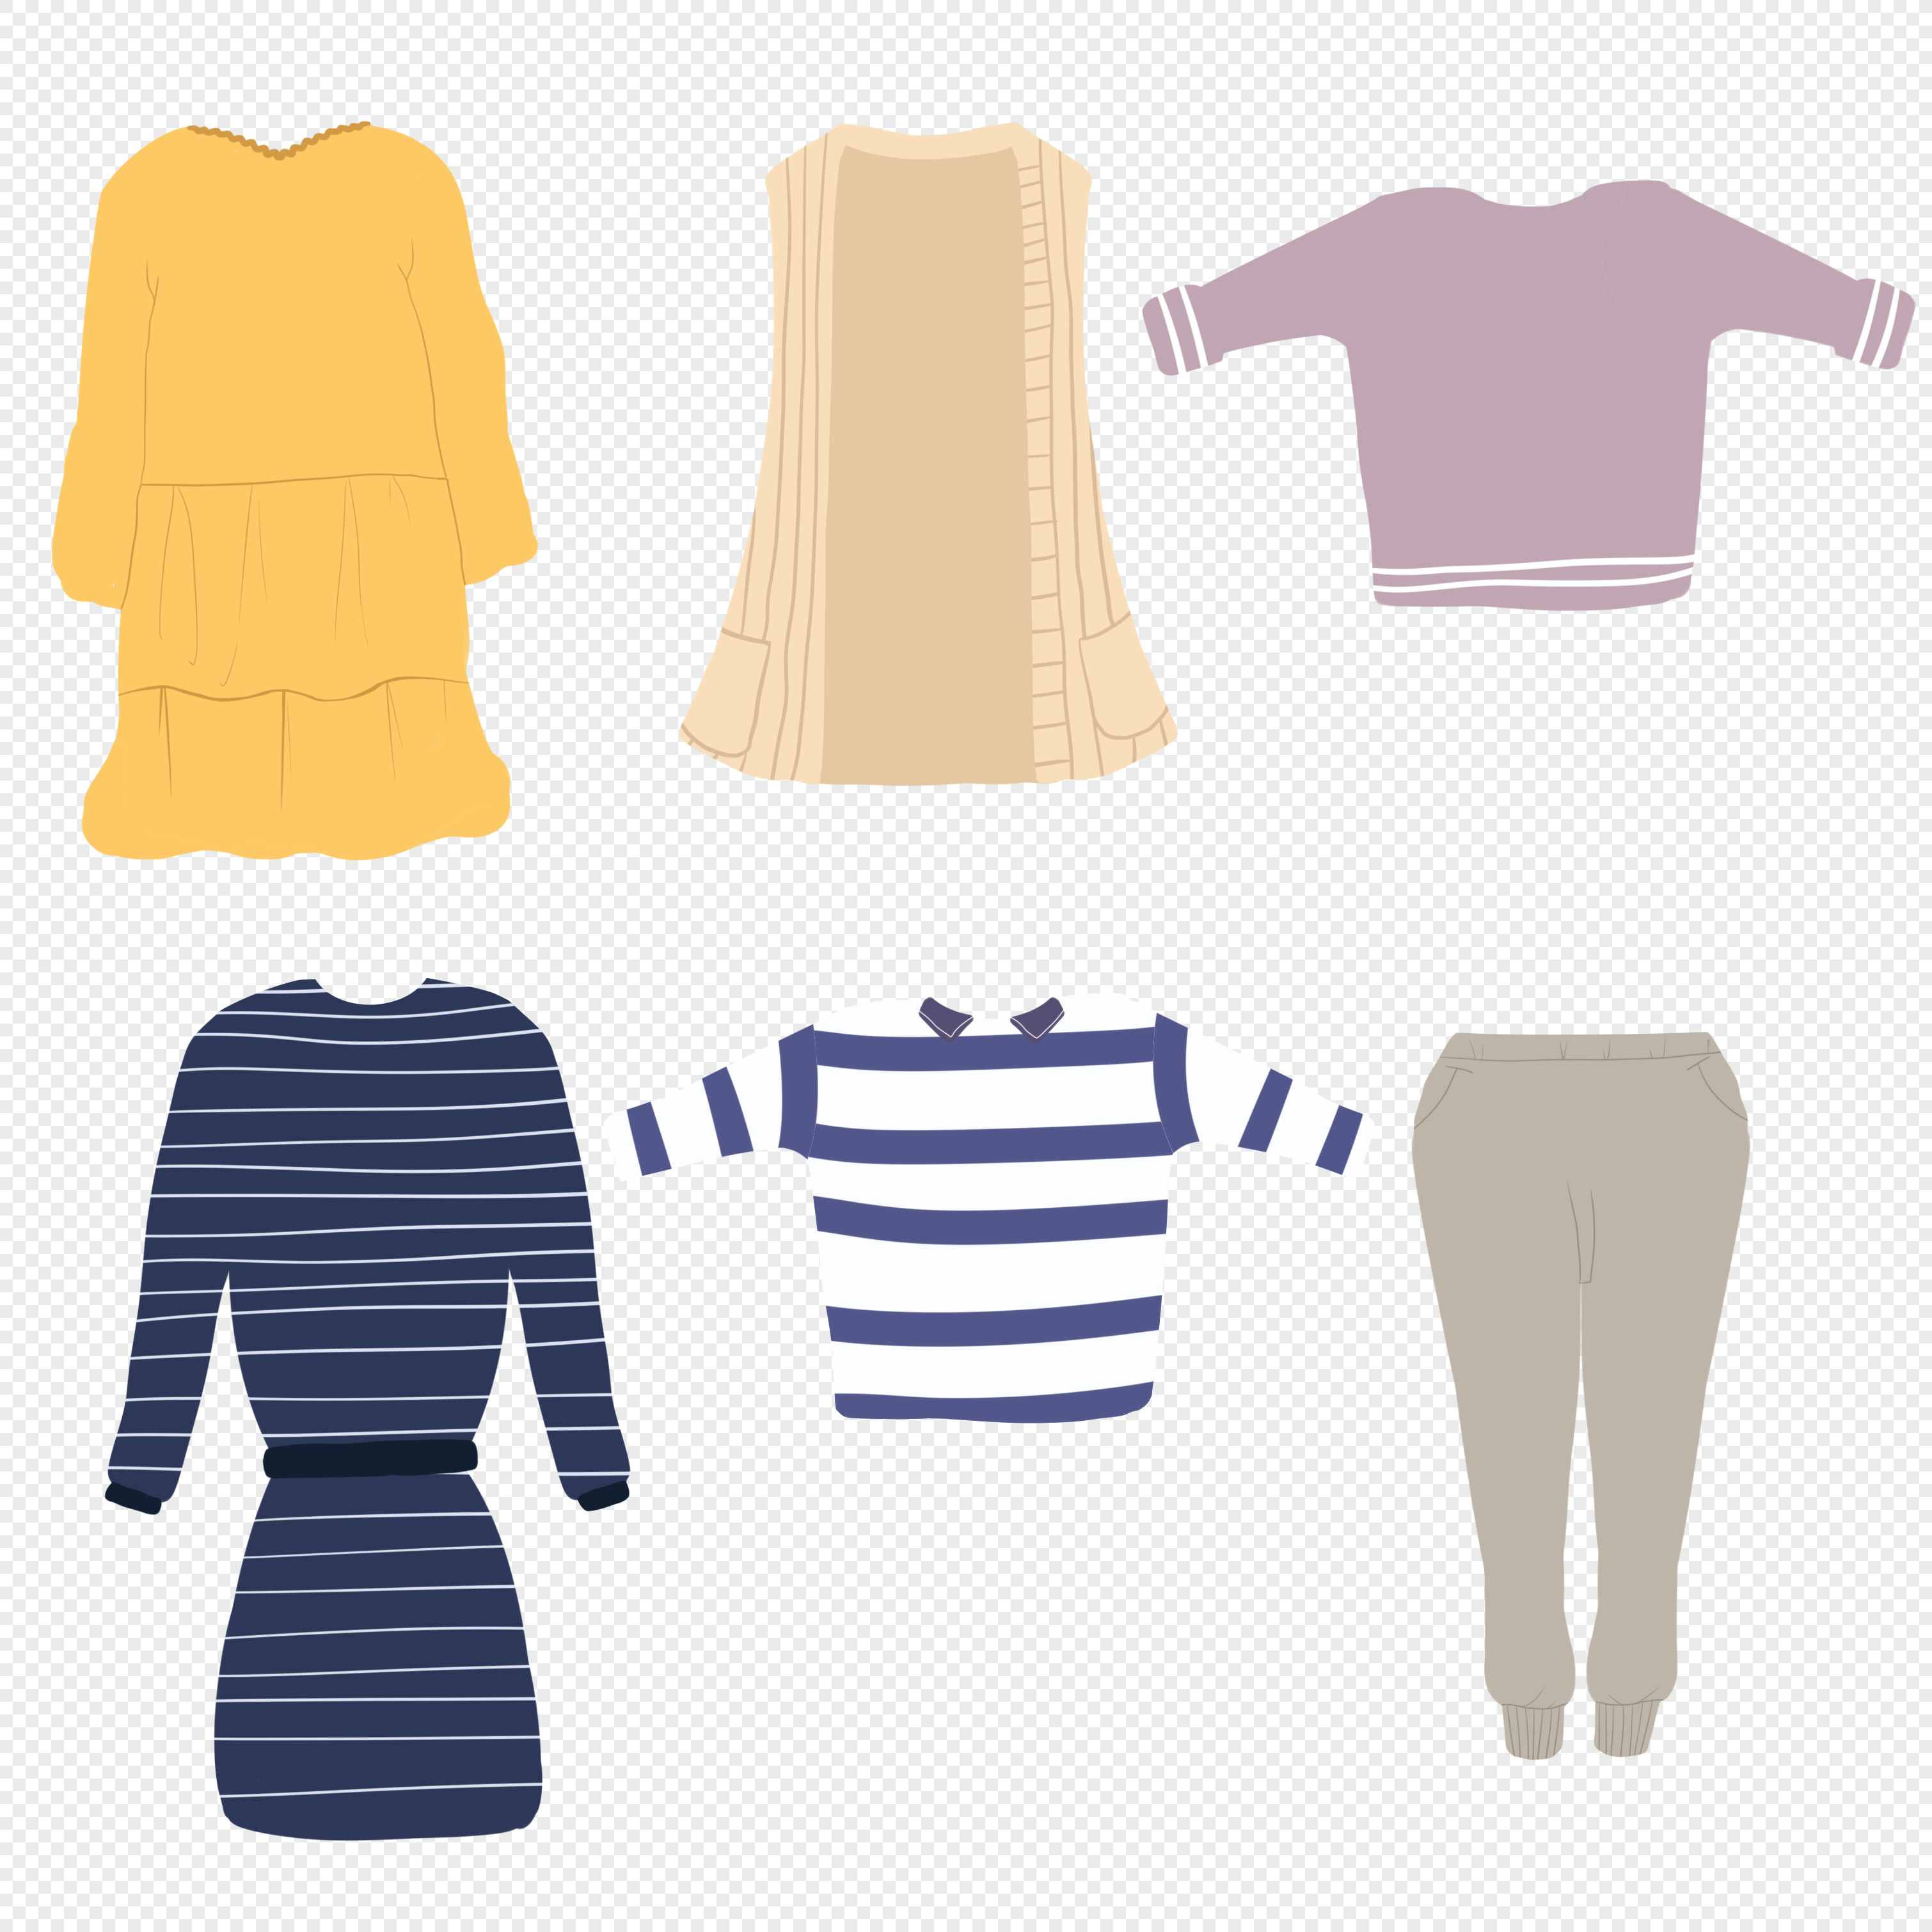 Clothing PNG Transparent Images - PNG All